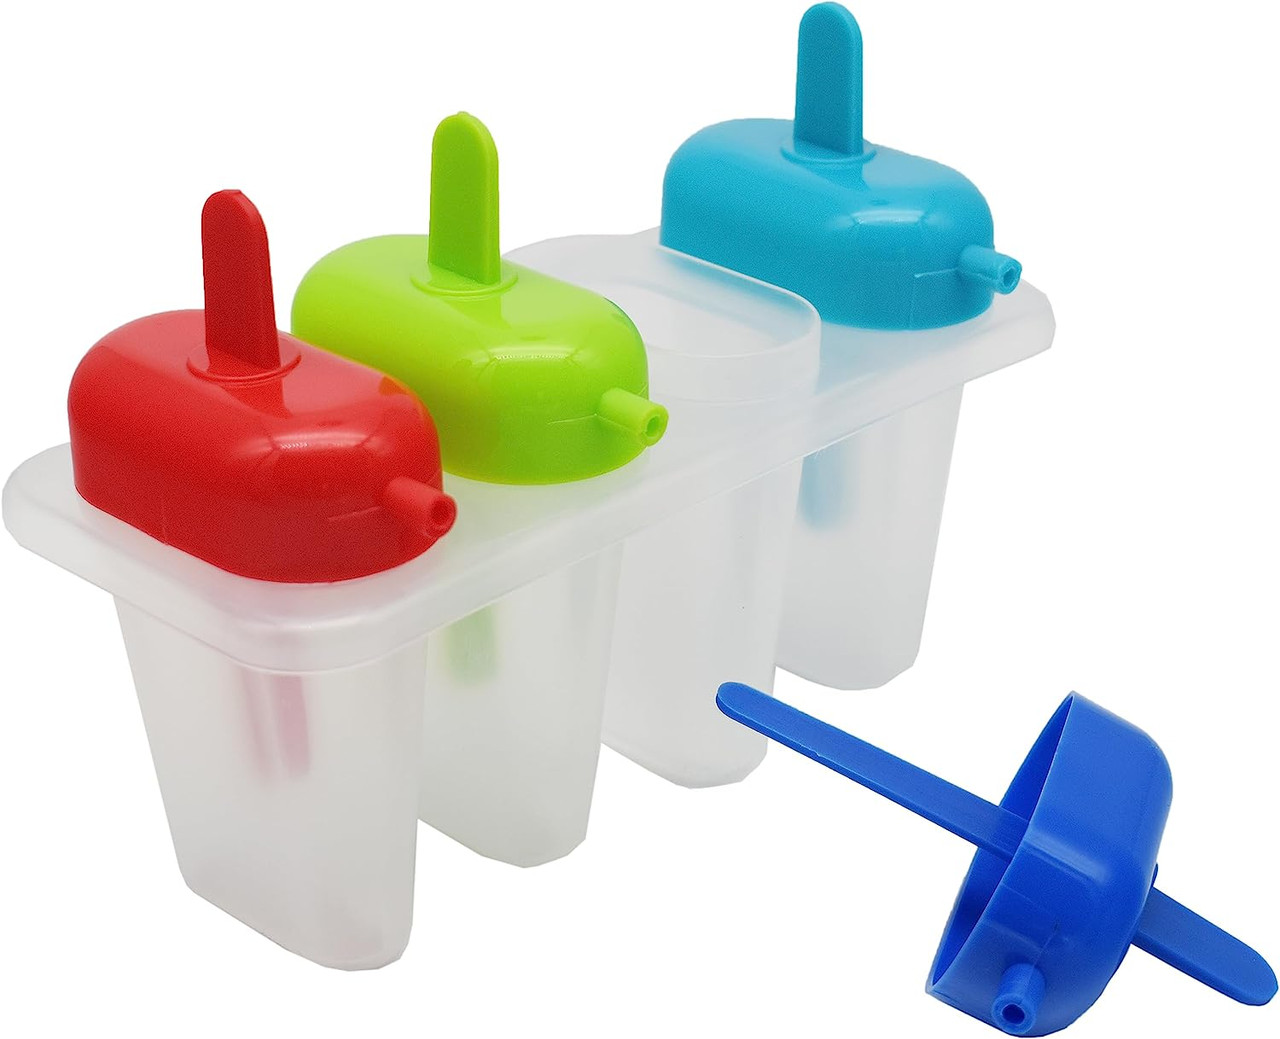 Set of Fun Summertime Ice Pop Molds - Each Handle Includes a Drip Guard  with a Straw! - Great for Parties, Snacks, and So Much More! - DIY Tool  Supply